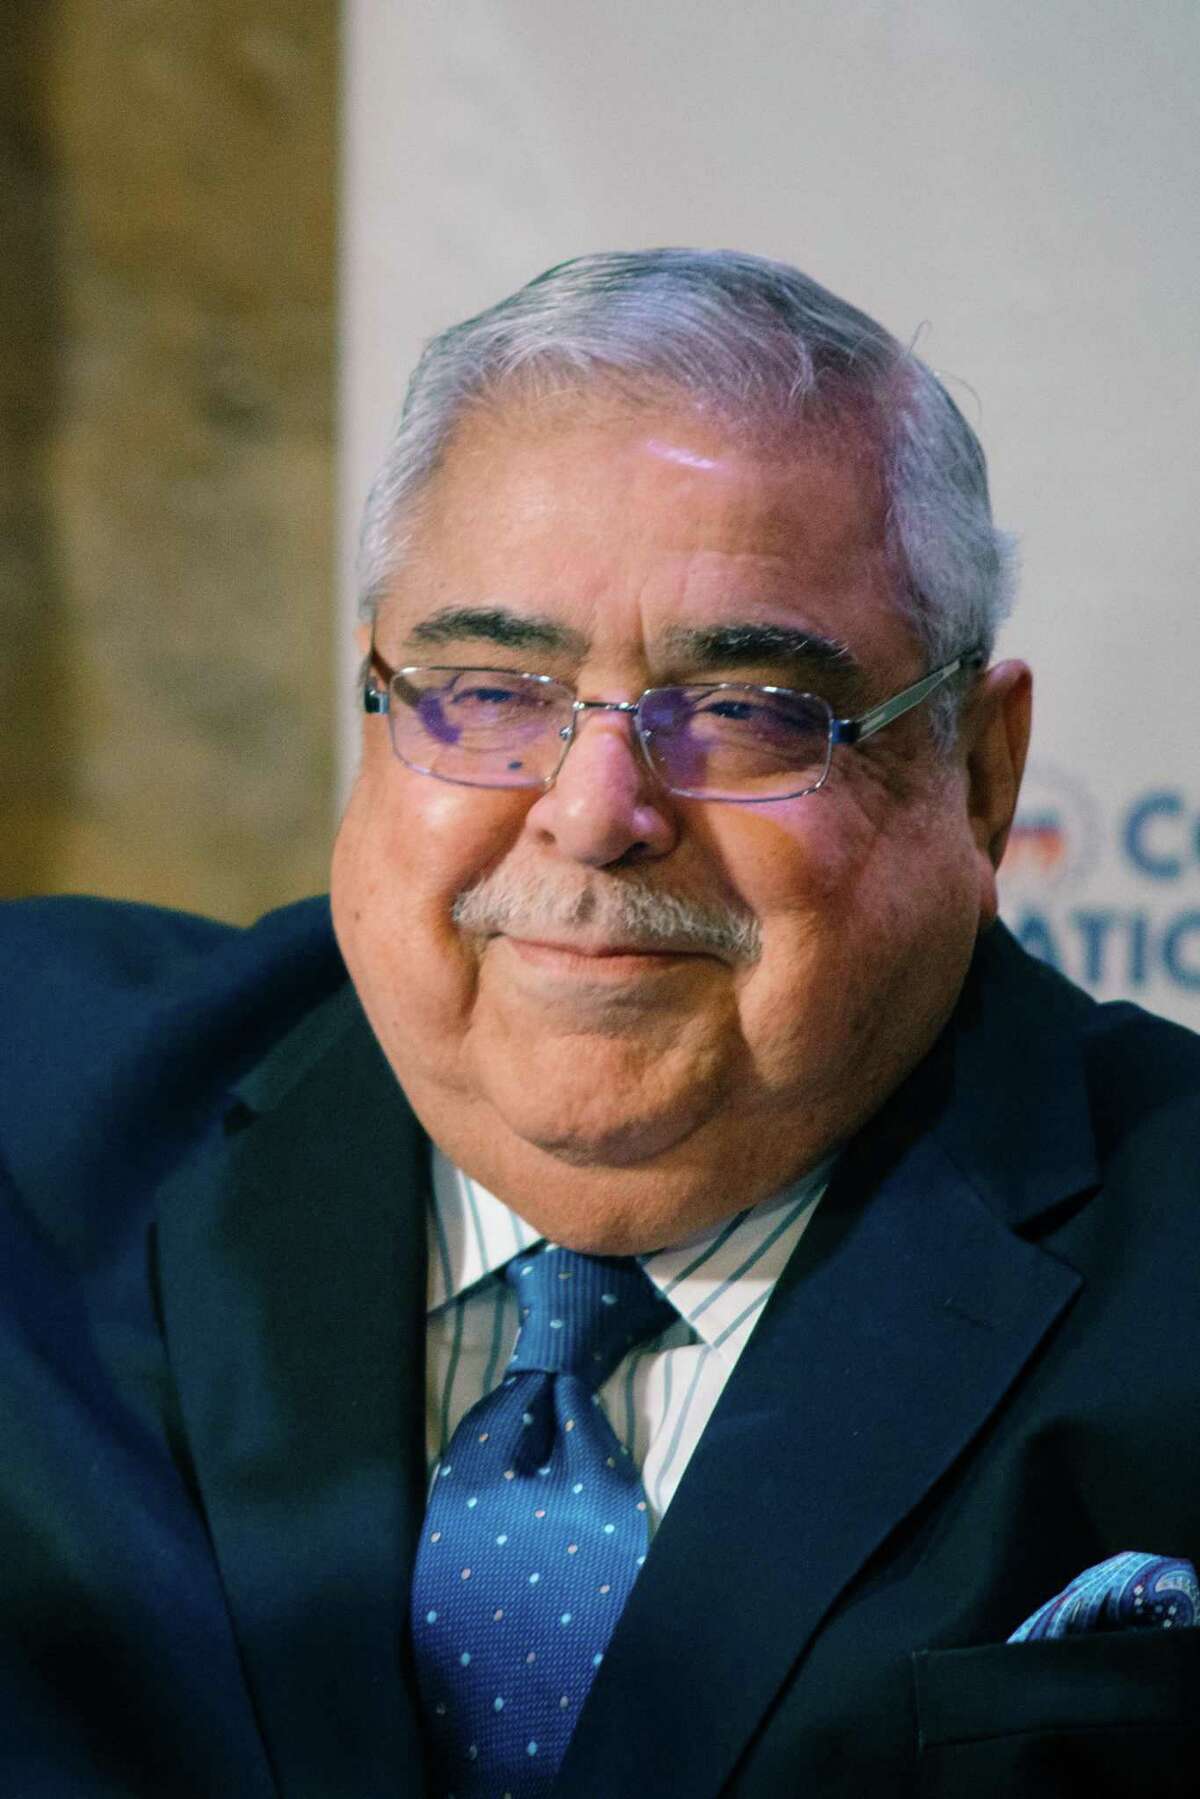 Paul Elizondo died unexpectedly Thursday morning. Elizondo was a mainstay on the Bexar County Commissioner’s Court since 1982 and roundly acknowledged as one of San Antonio’s major power brokers over the decades.